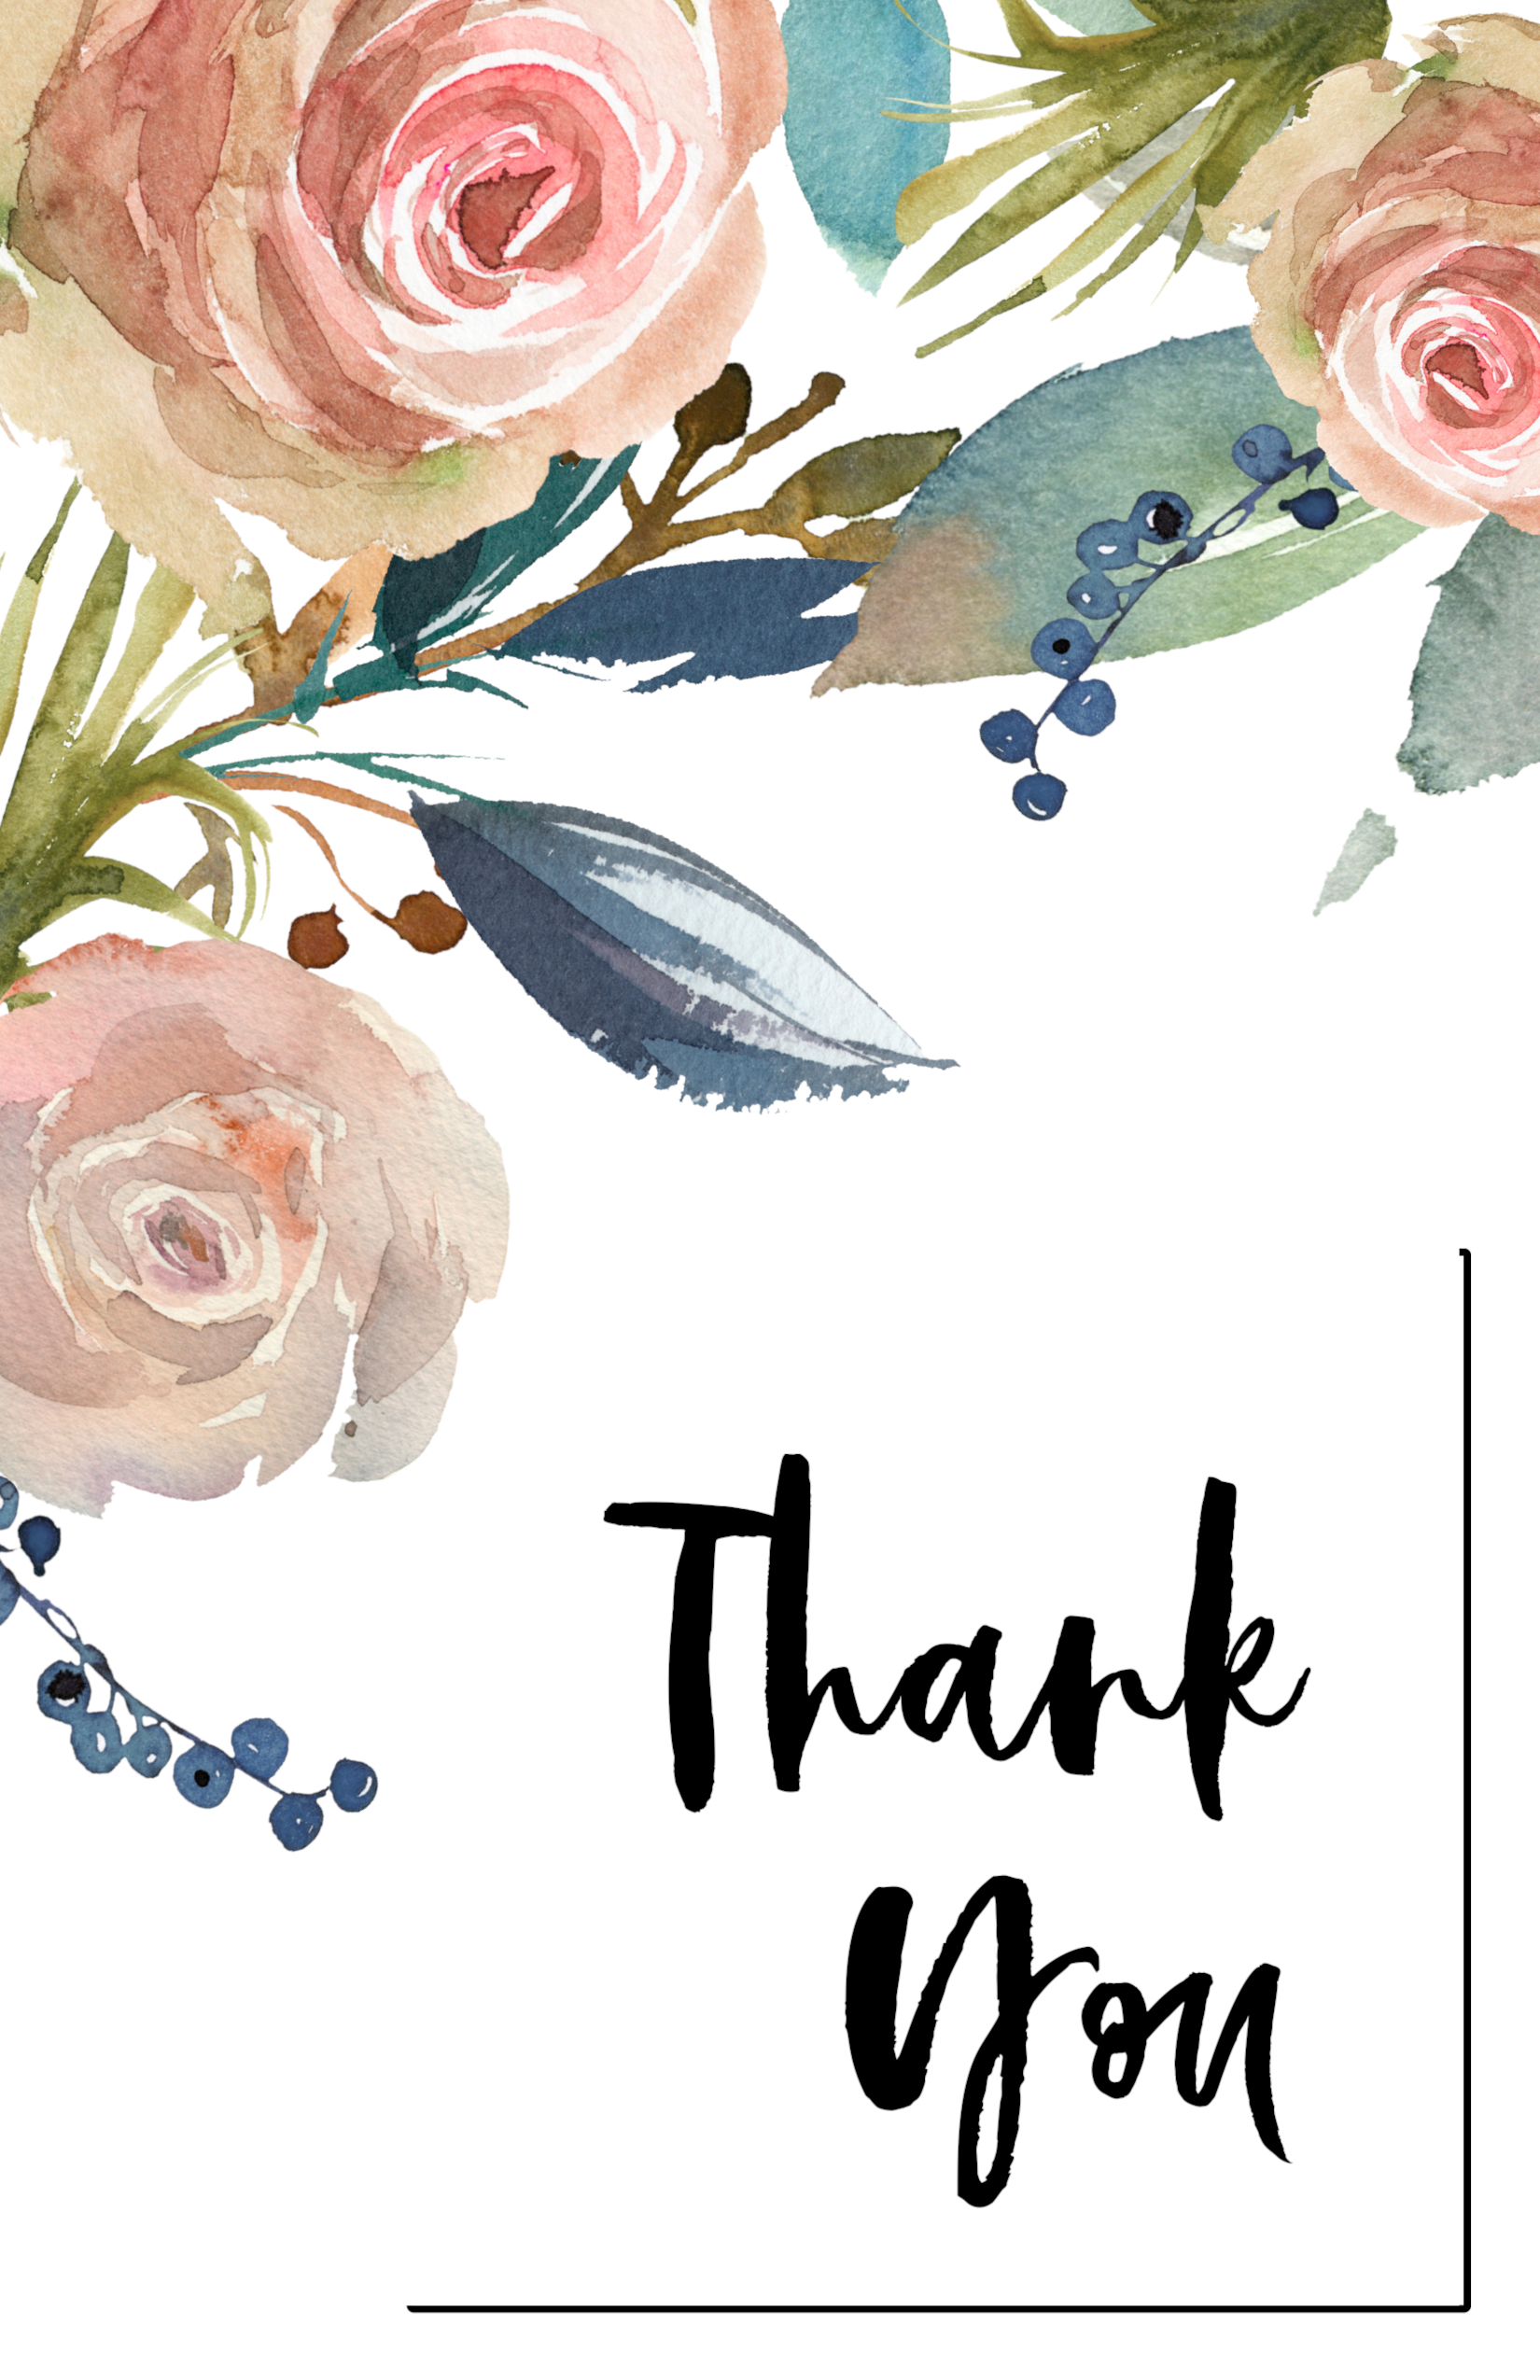 Free Printable Thank You Cards Paper Trail Design